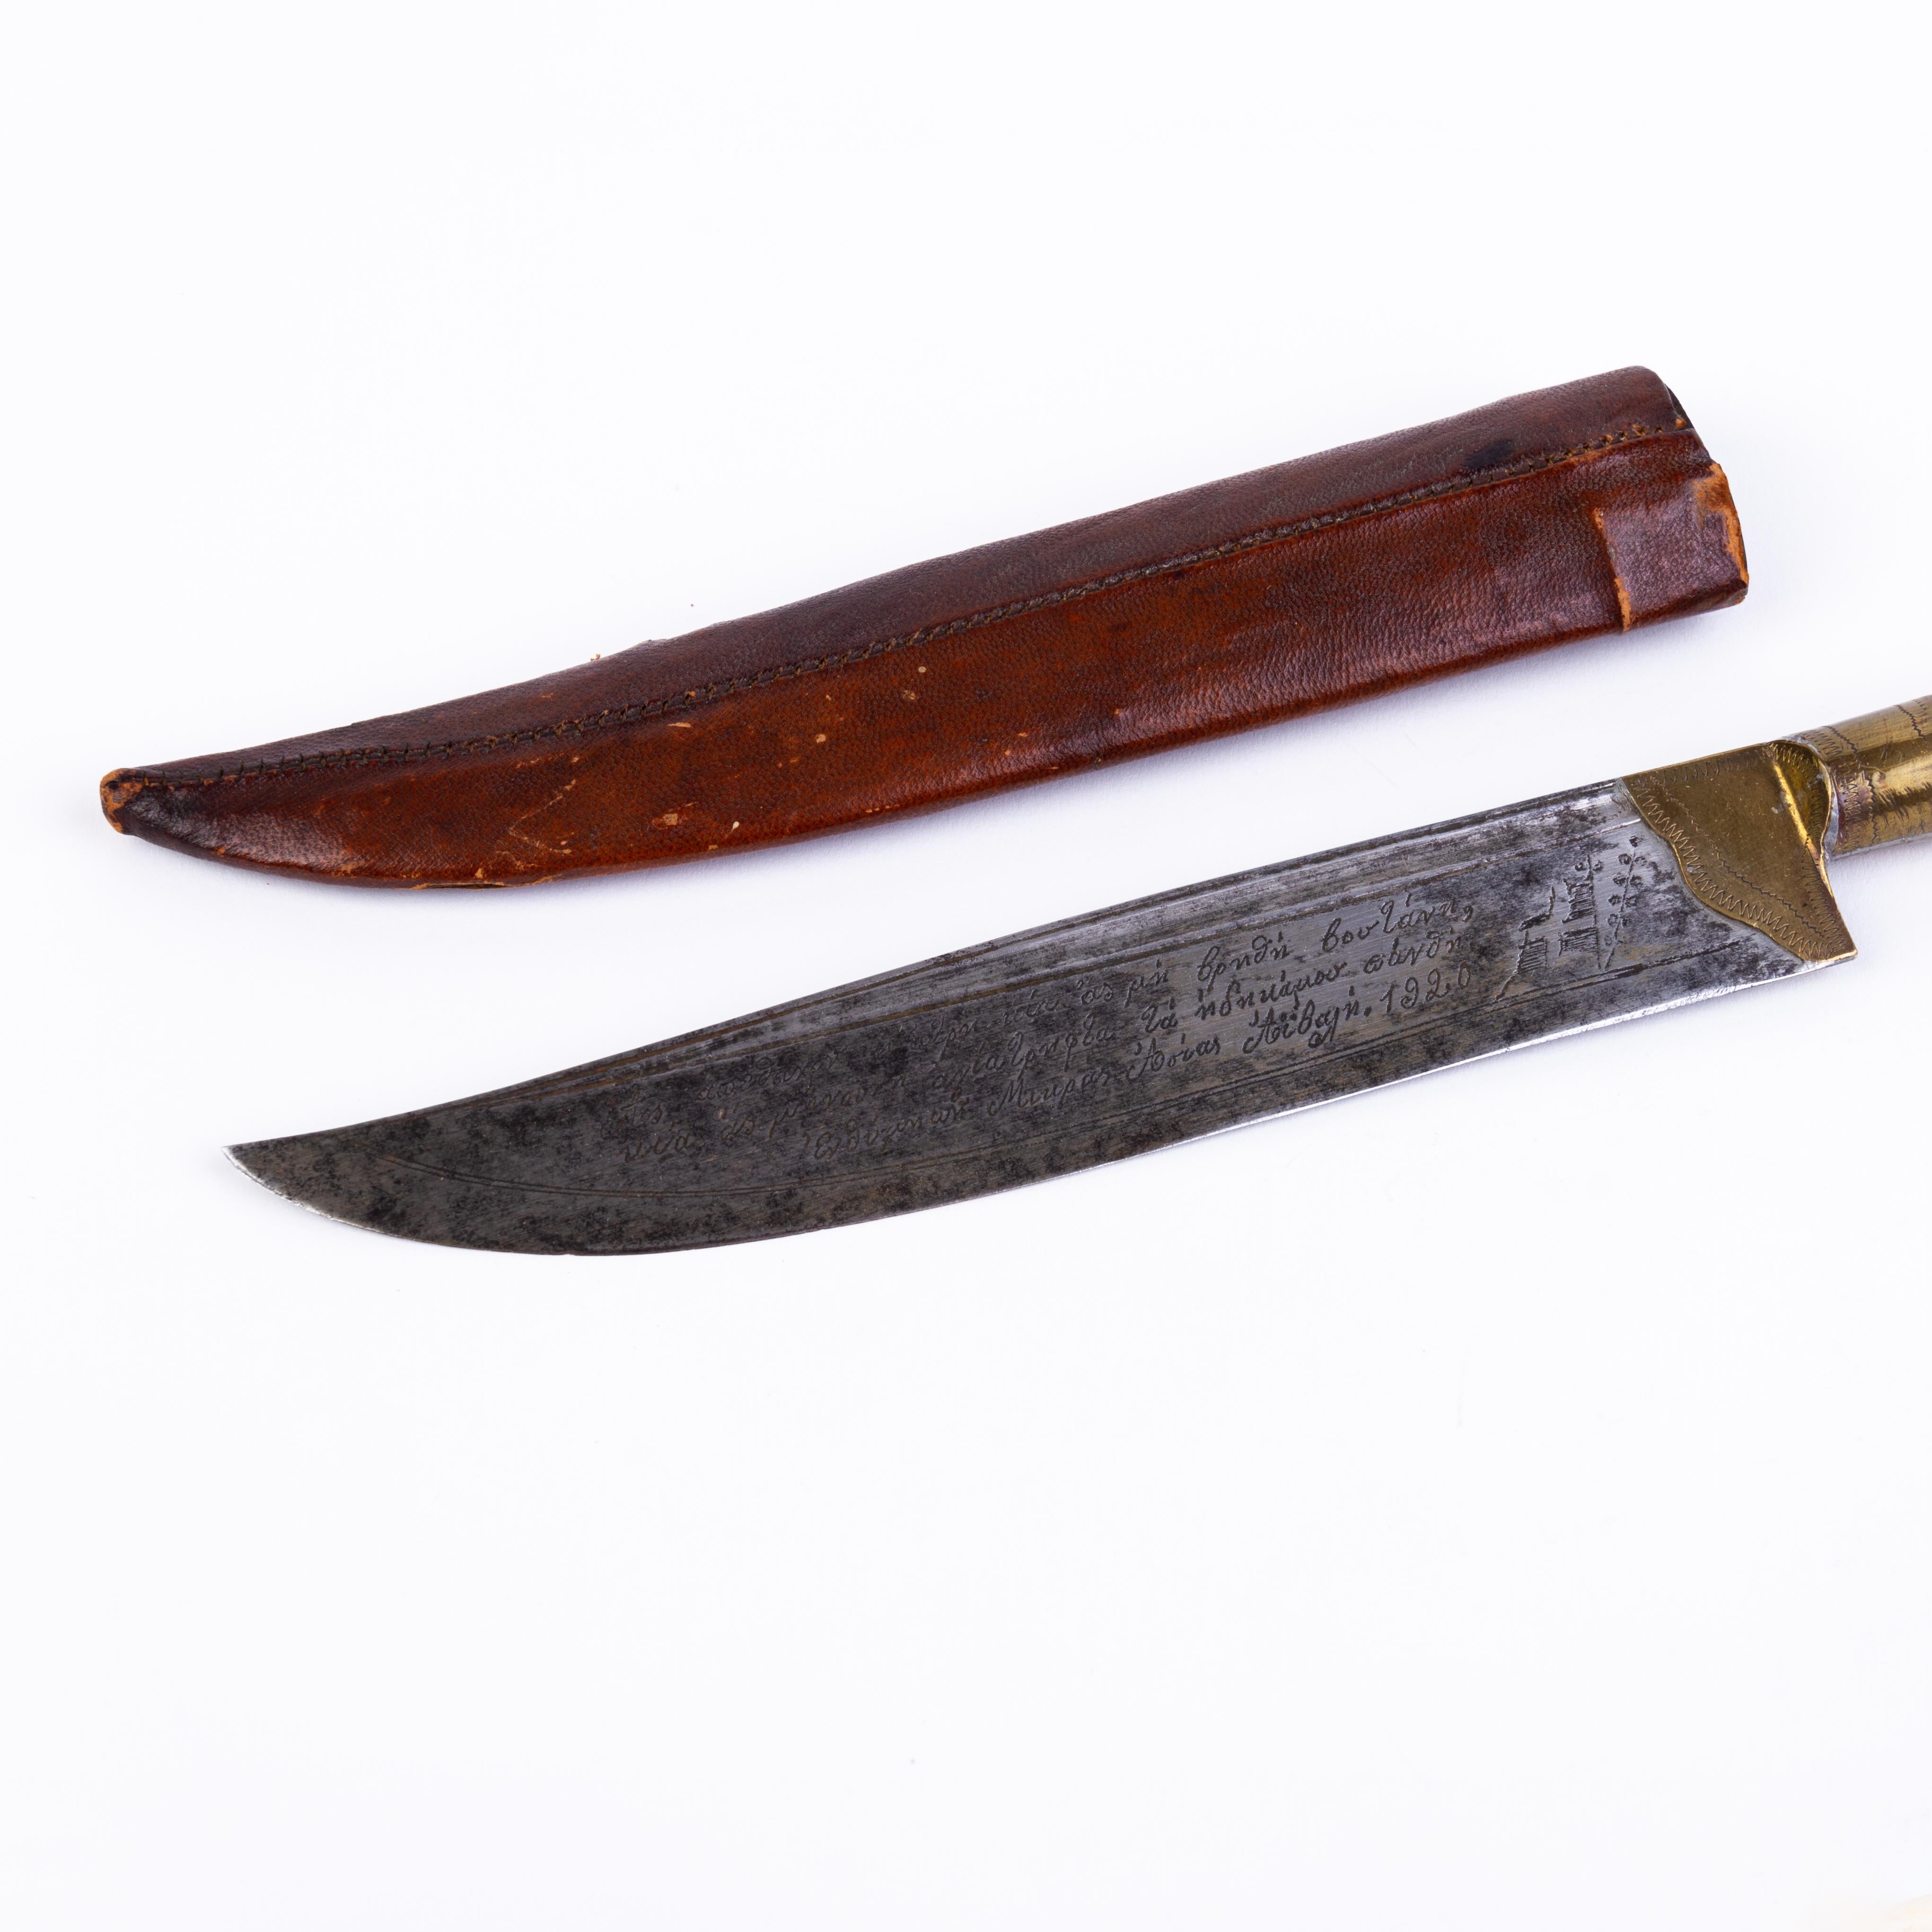 Eskimo Inuit Tribe Caribou Bone Engraved Hunting Knife ca. 1920
Good condition overall, with engraved steel blade.
From a private collection
Free international shipping.